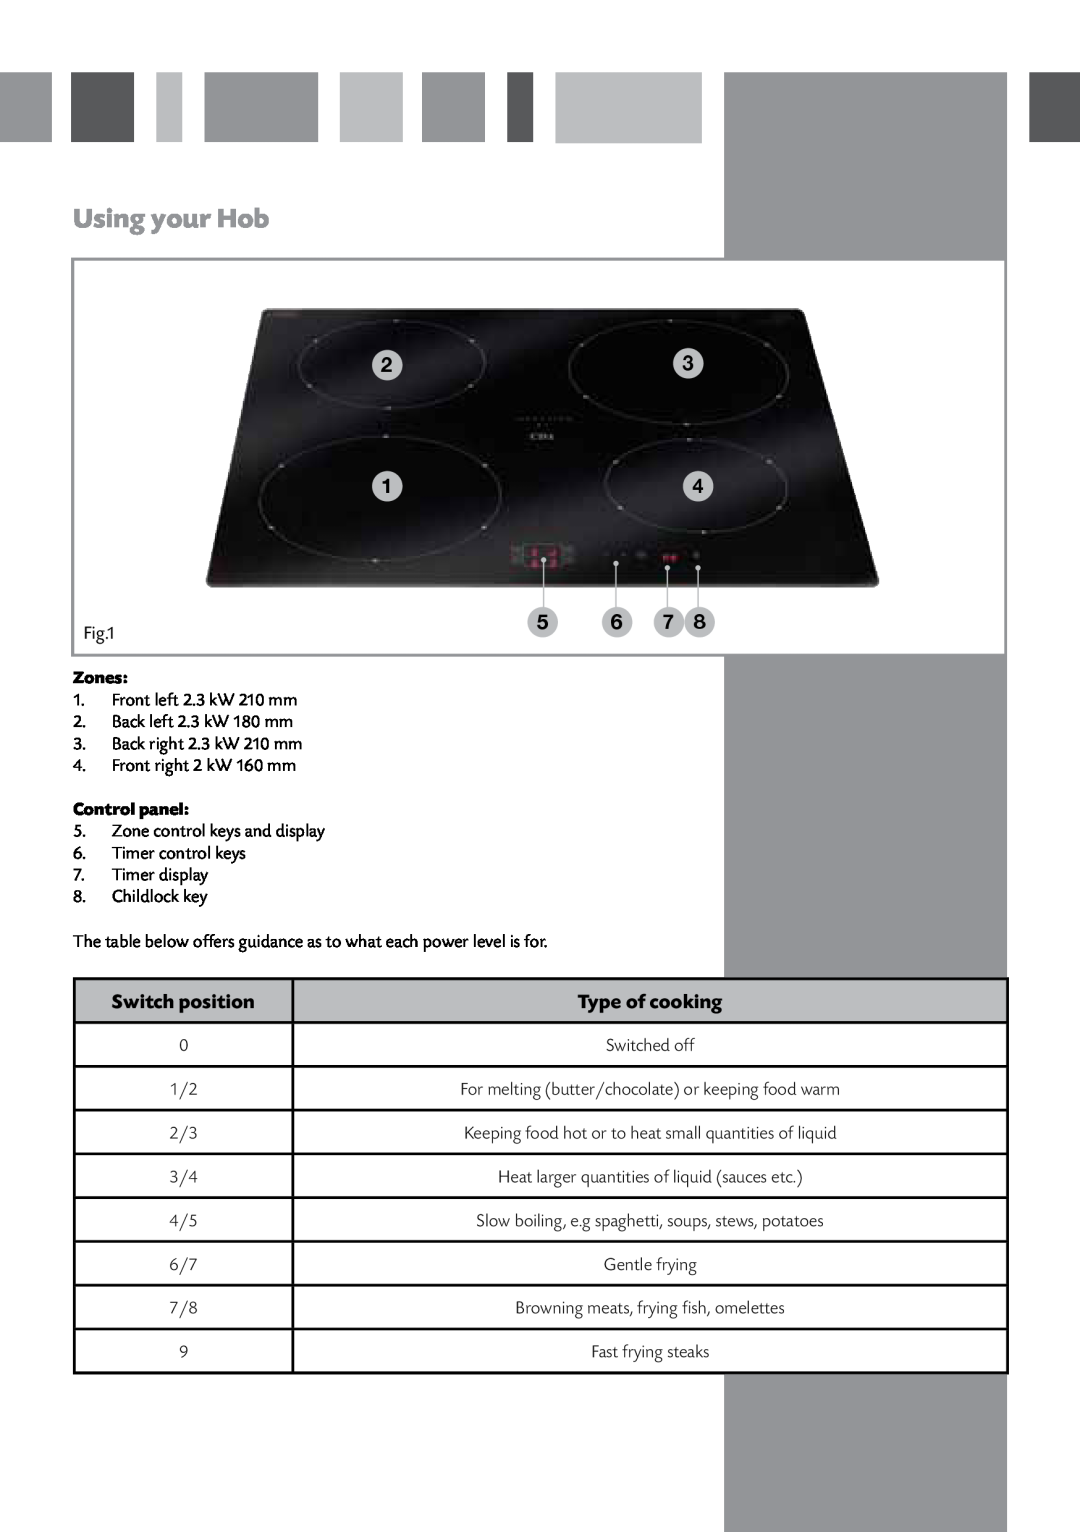 CDA HCN610 manual Using your Hob, Switch position, Type of cooking, Zones, Control panel 